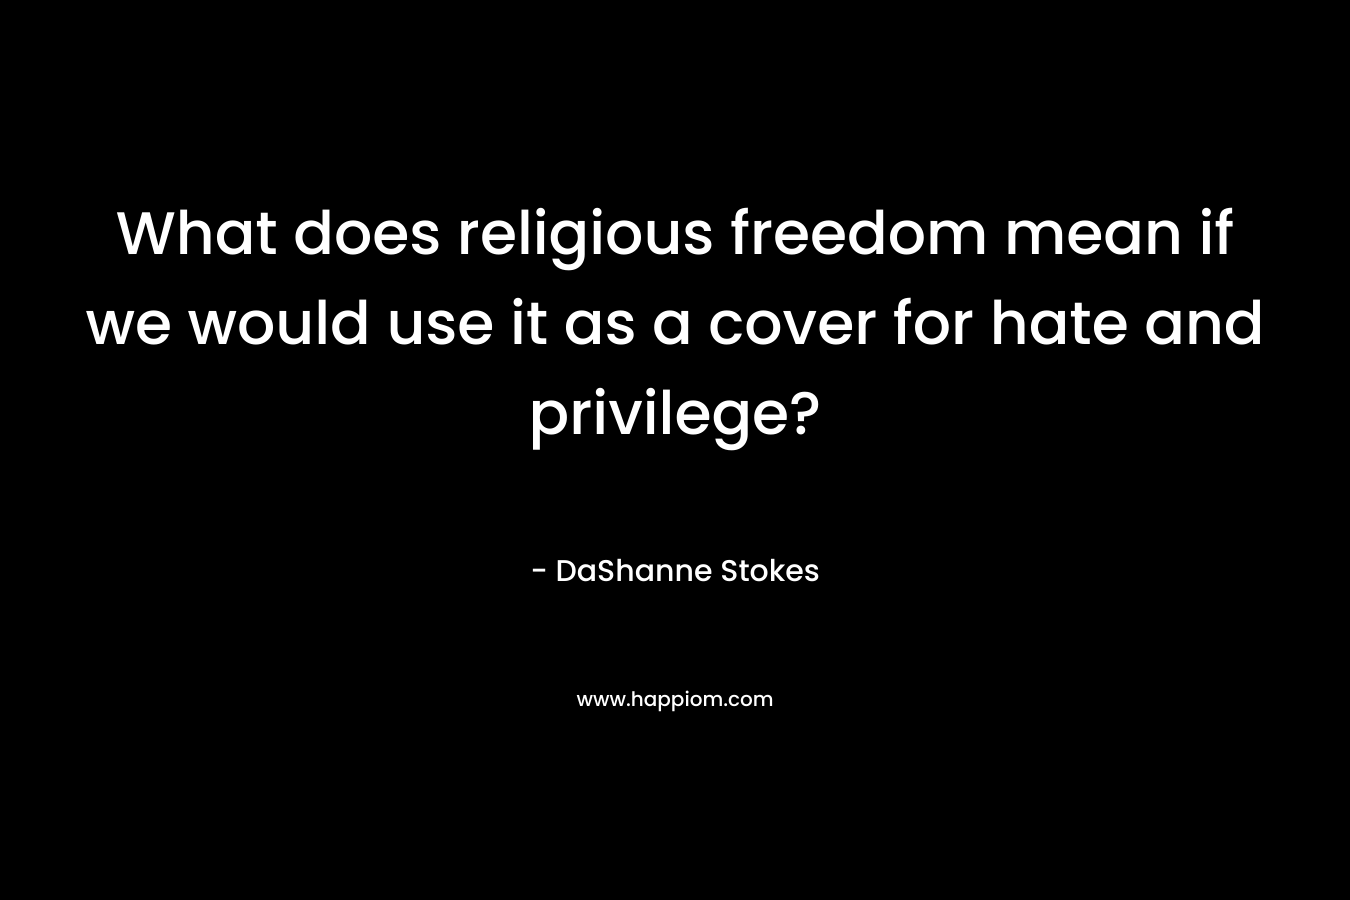 What does religious freedom mean if we would use it as a cover for hate and privilege?